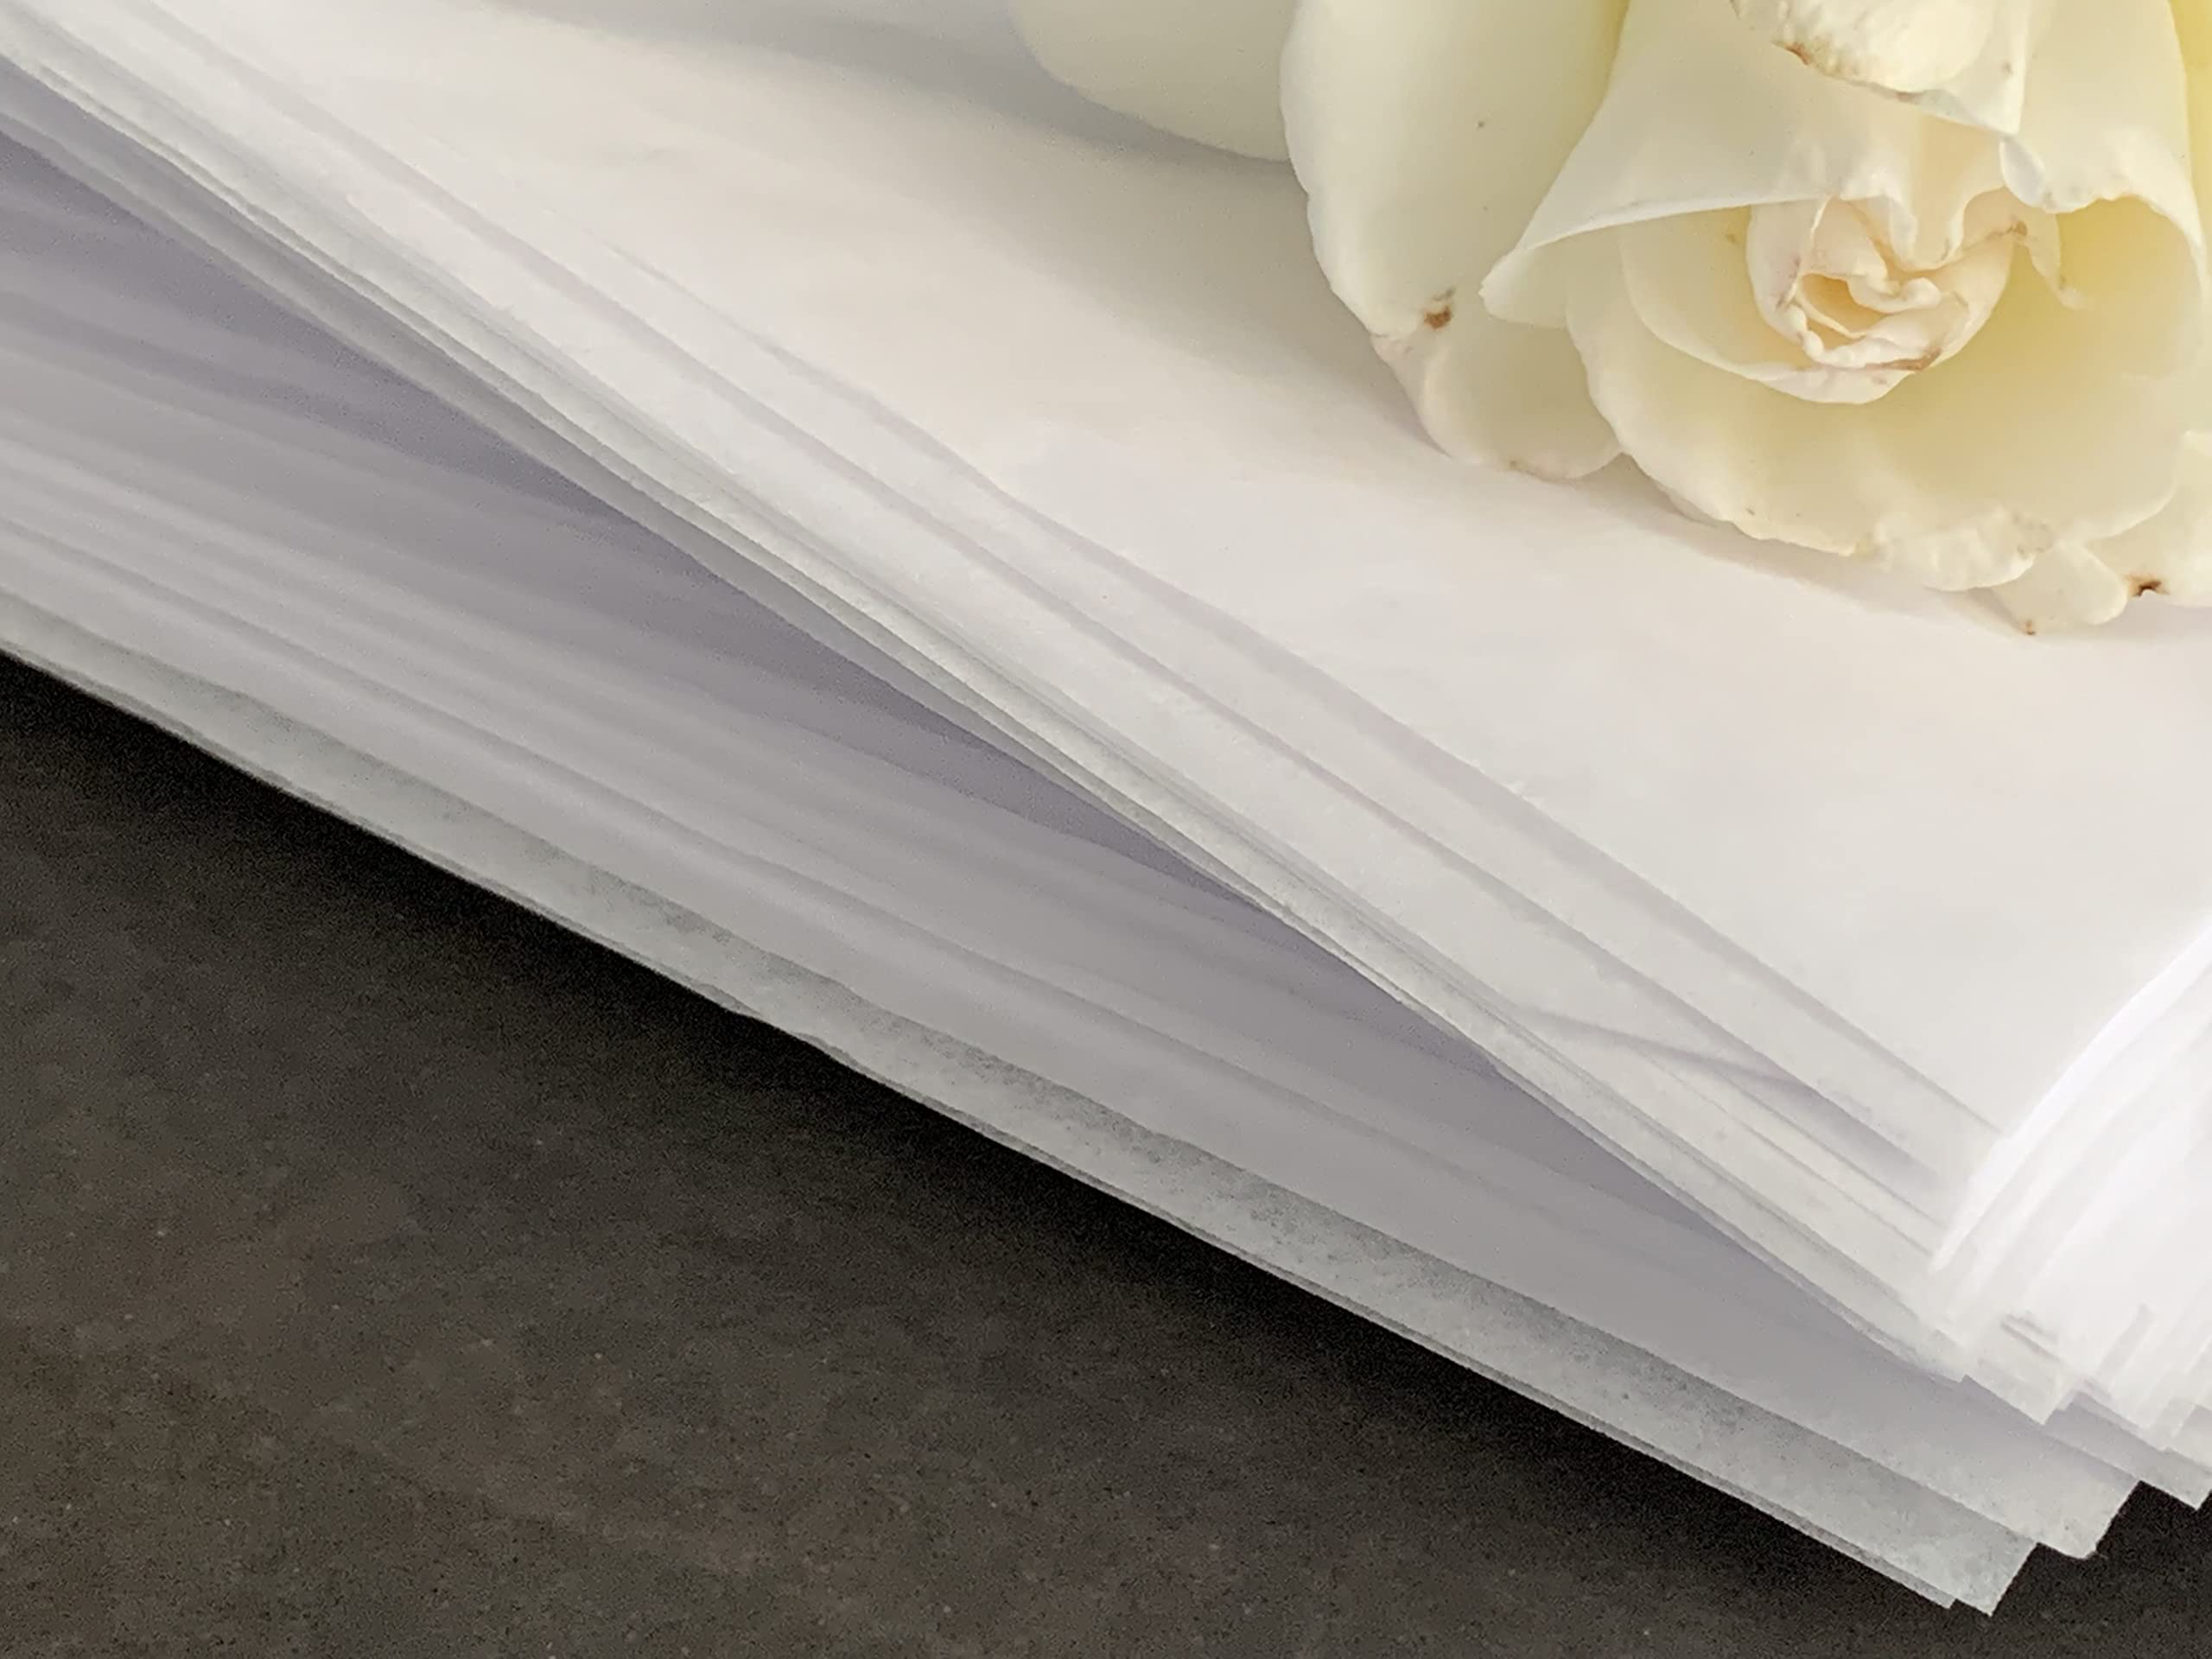 25 Sheets 24 x 36 The Linen Lady's Acid Free Archival Tissue Paper -  Unbuffered & Lignin Free (25) Protect Your HEIRLOOMS!